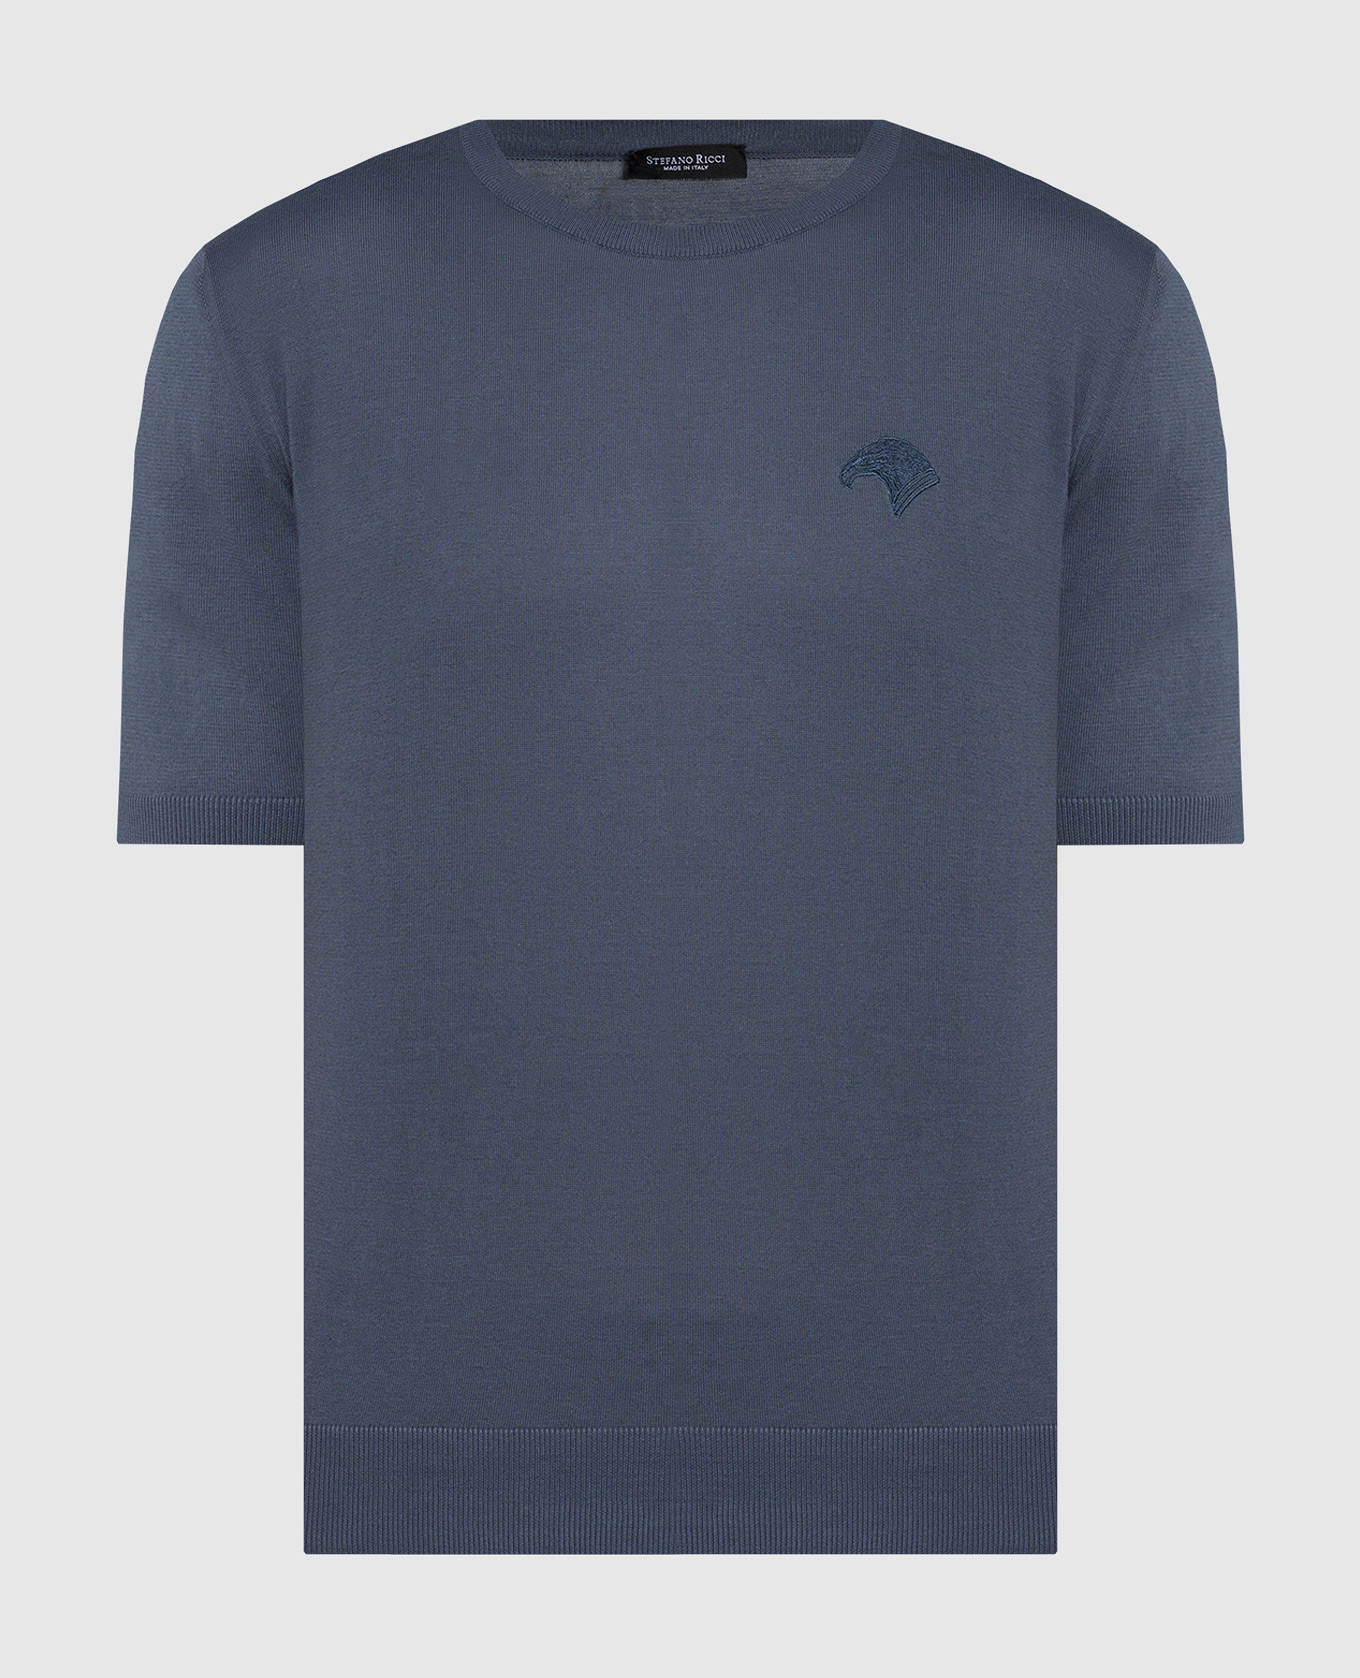 Blue t-shirt with embroidered logo emblem